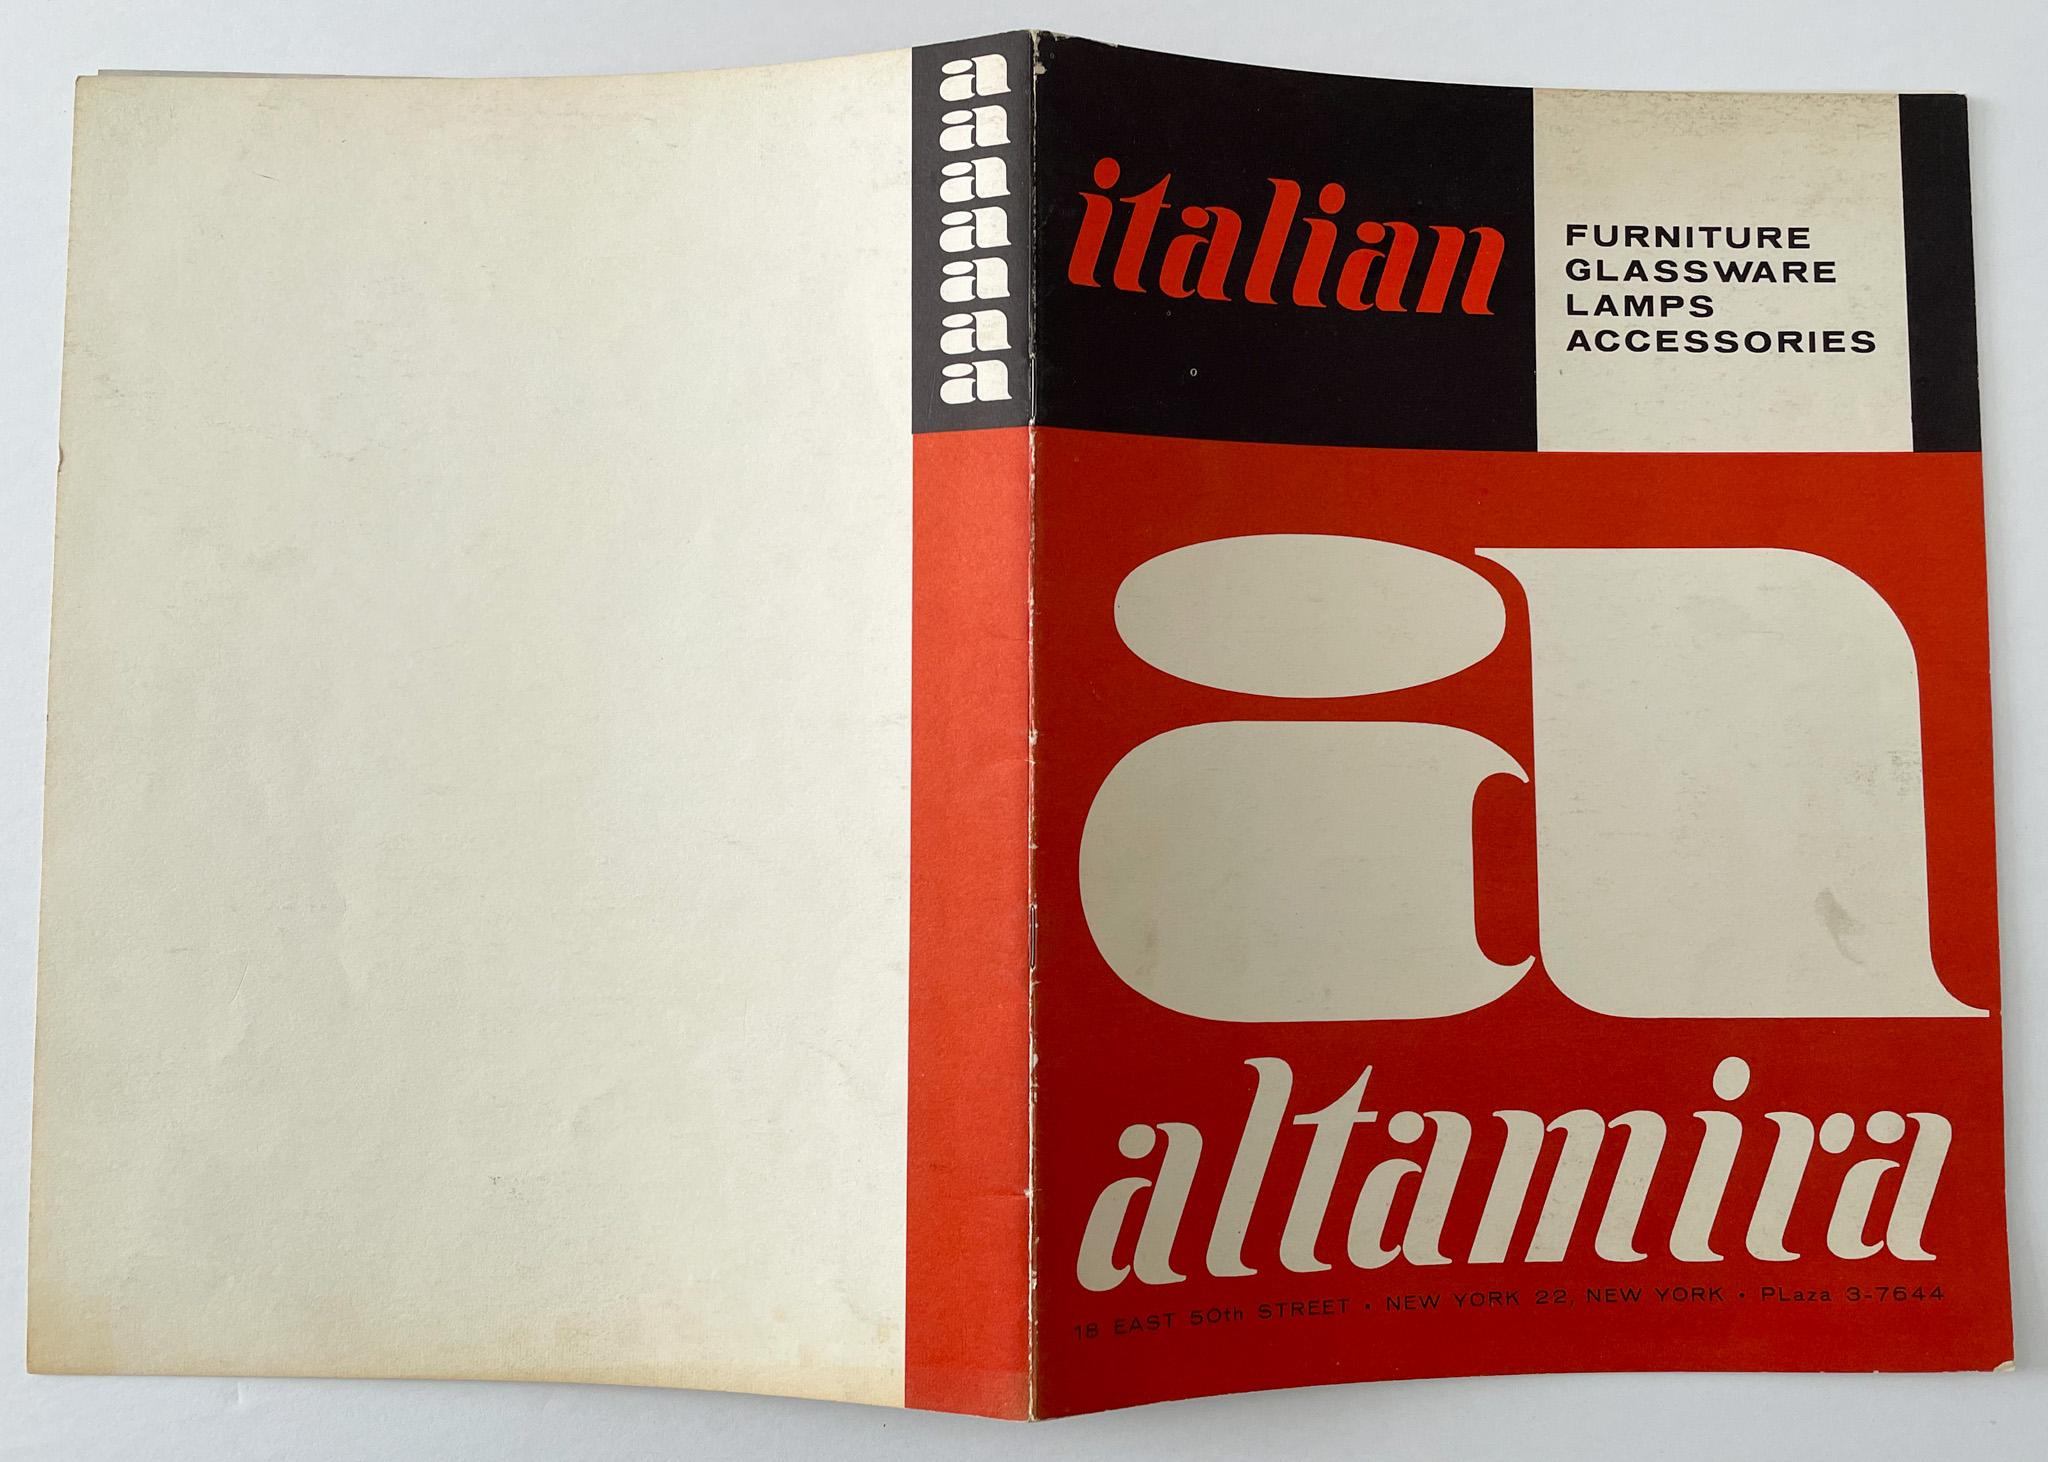 Catalog showcasing high-end Italian furnishings and accessories, published circa 1956 by the fabled Altamira design center located at 18 East 50th St in New York City. Per the introduction, “Altamira is the only center in this country where